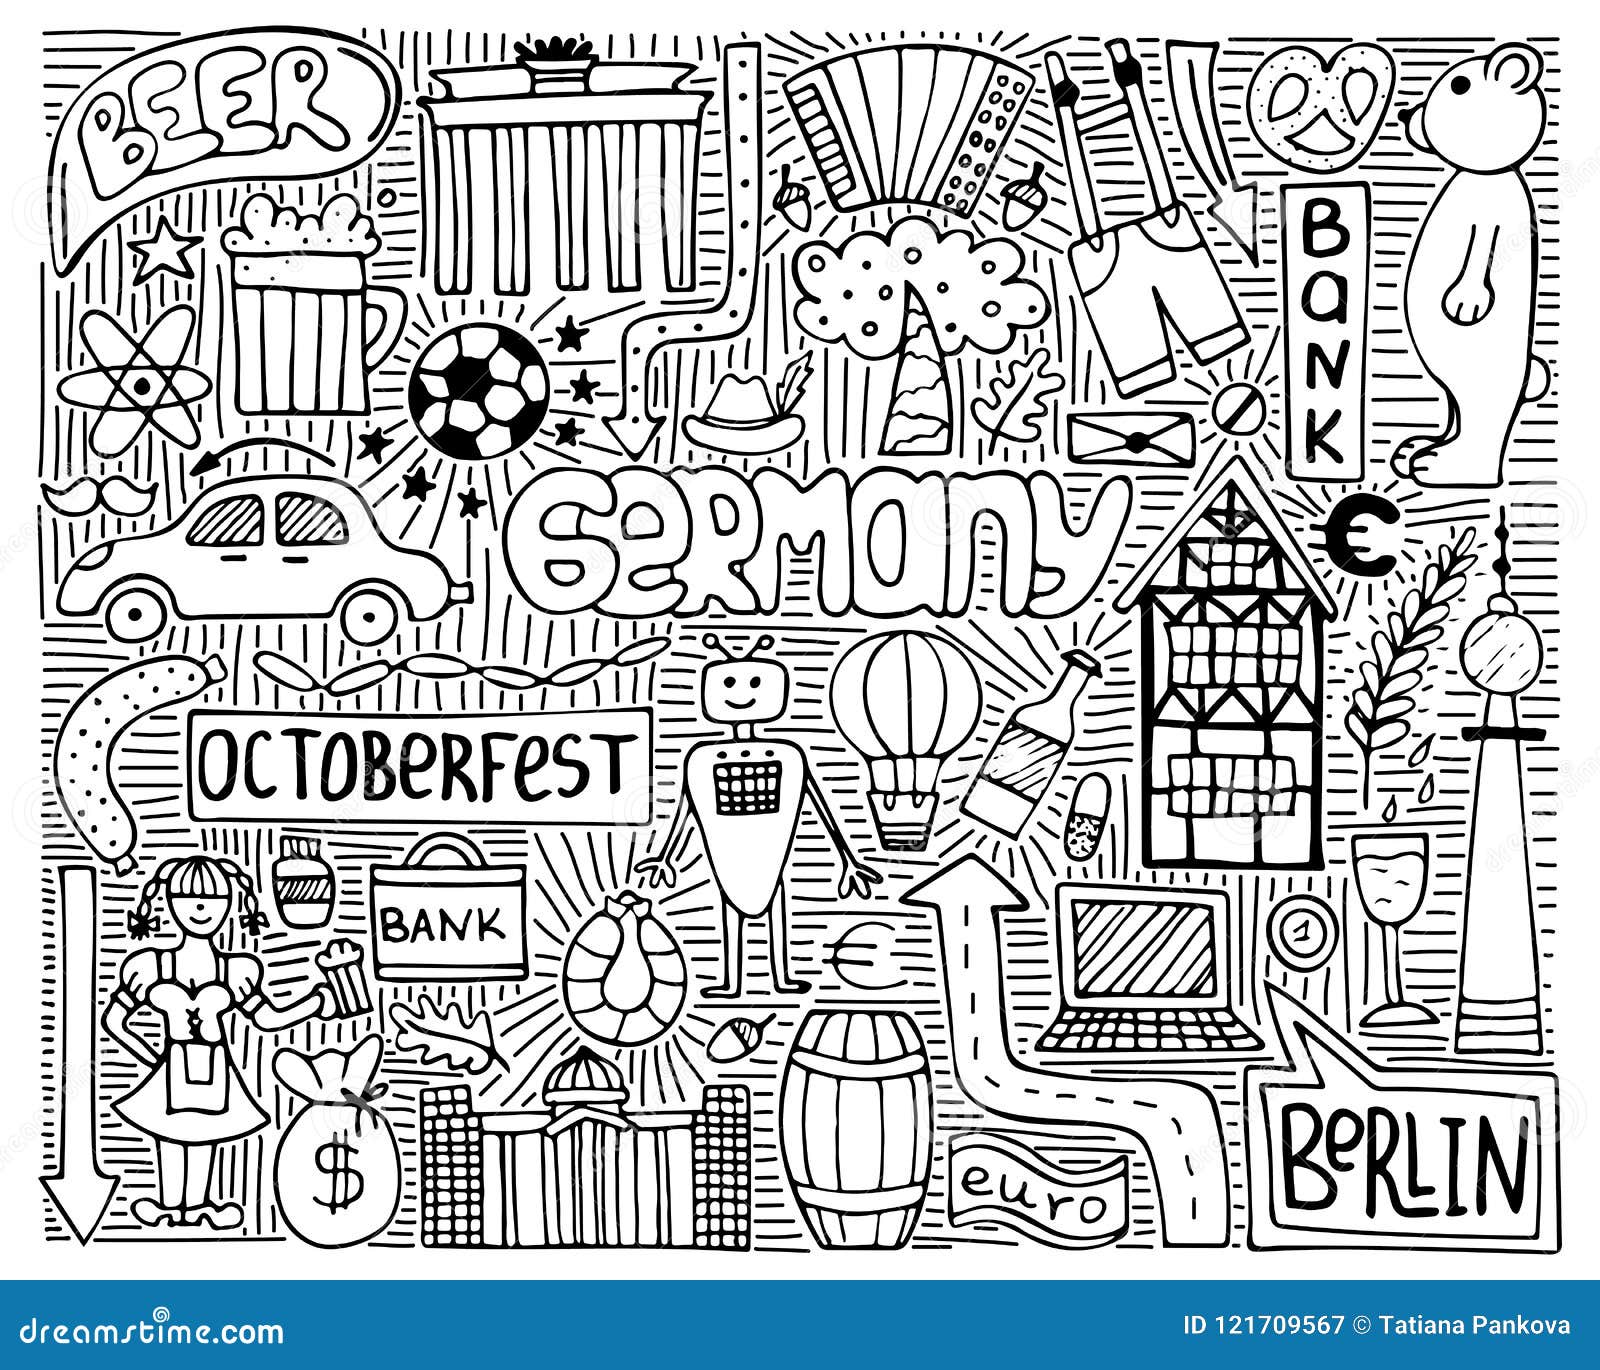 Doodle Vector Monochrome Poster With Germany Symbols Wall Art Stock